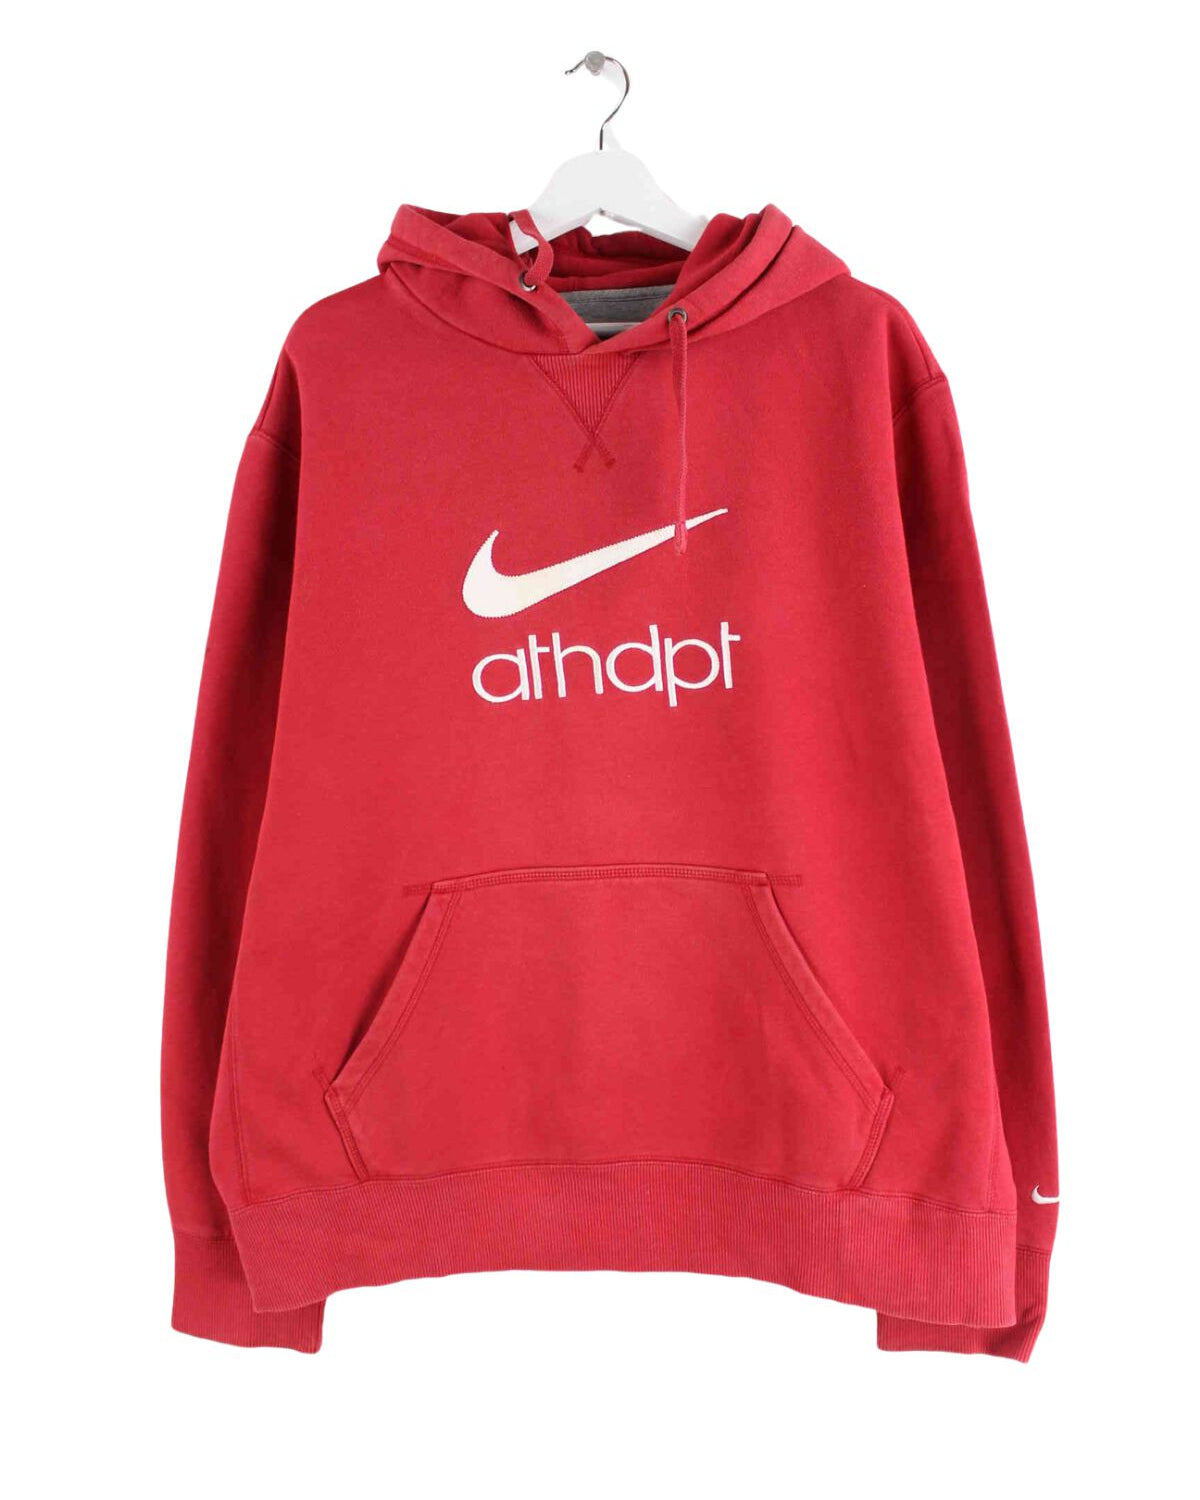 Nike Athletic Big Swoosh Embroidered Hoodie Rot XL (front image)